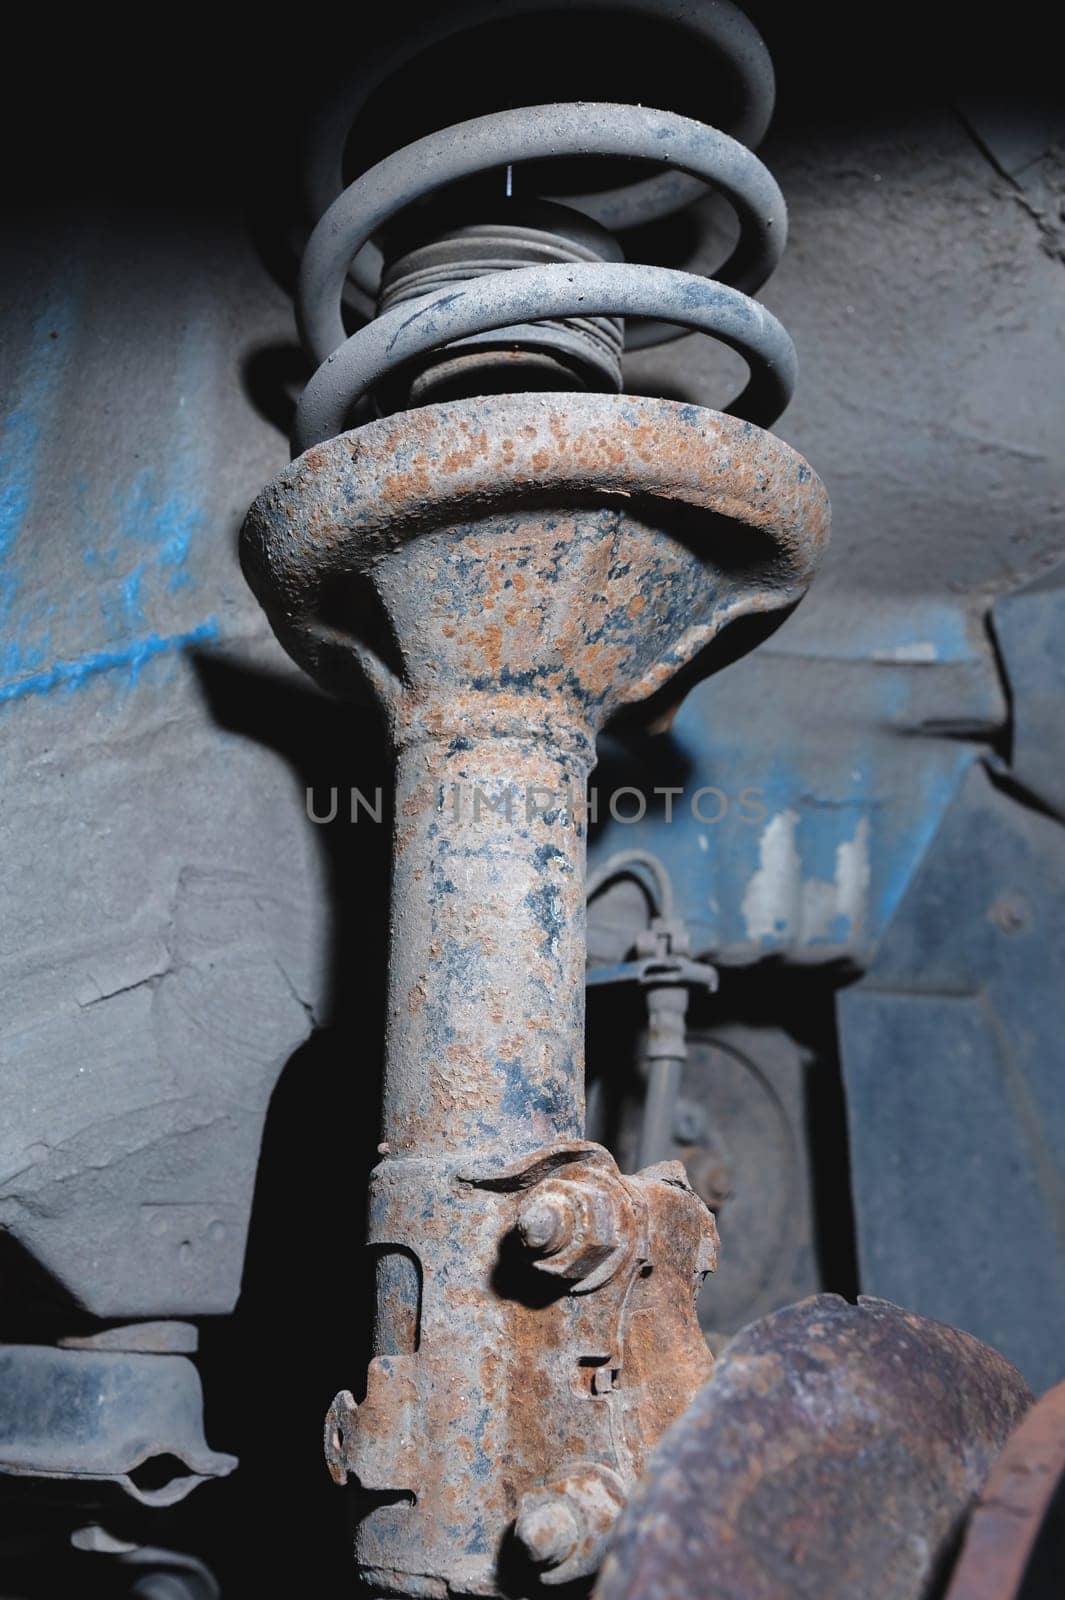 Rust protection and repair of a disk broken in a service center, close-up. Front suspension of an old car.